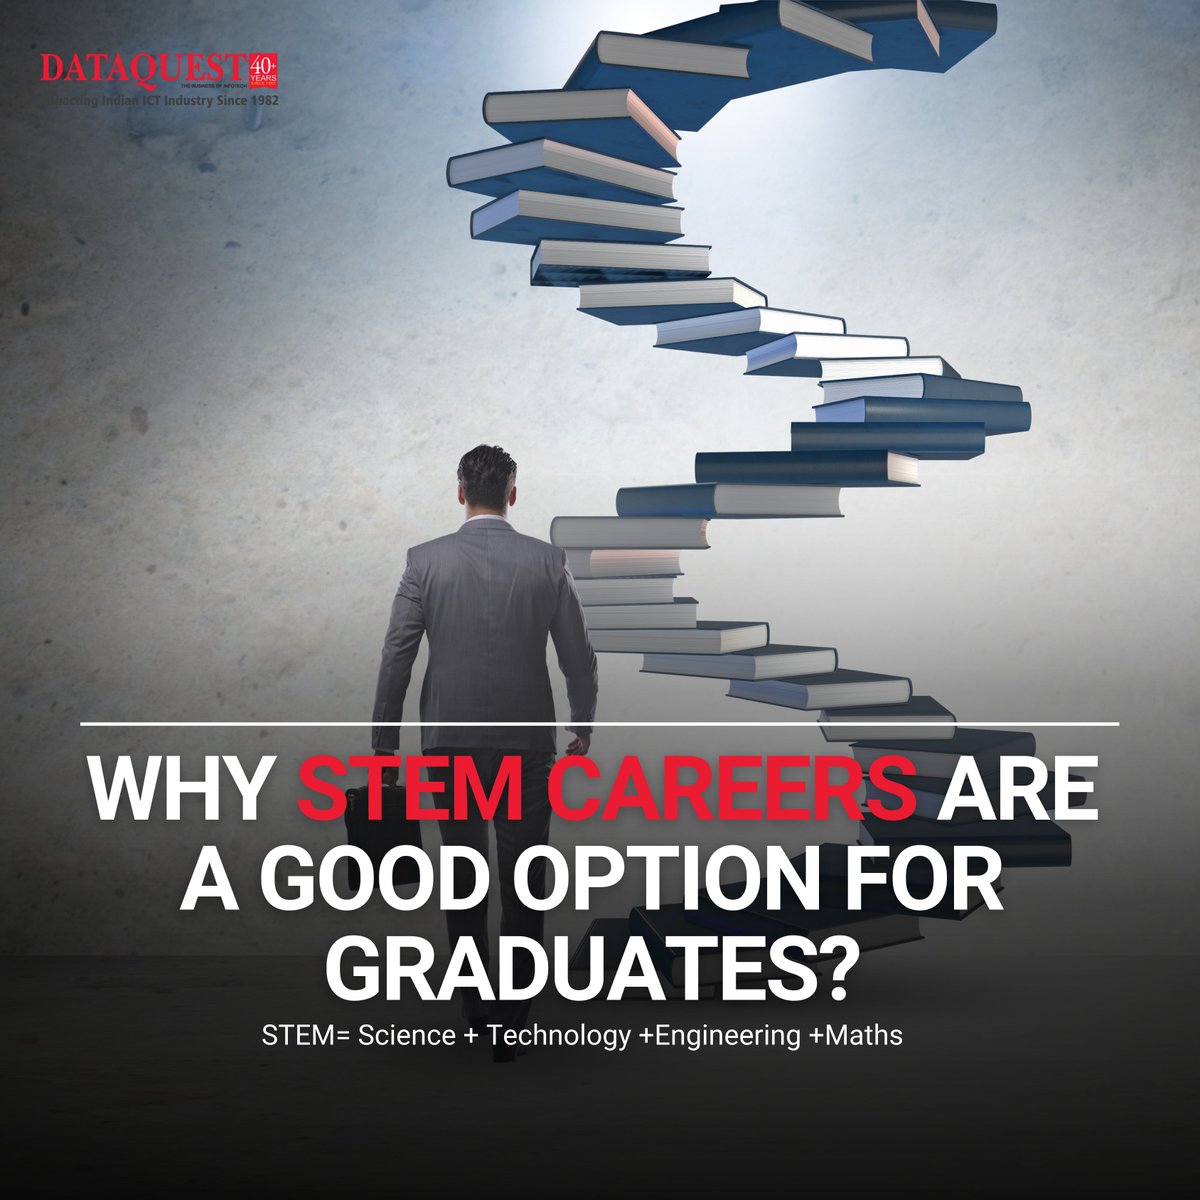 Are you a graduate wondering about your career path? Discover why STEM careers are the ultimate choice for a successful and fulfilling future. 

#STEMCareers #FutureReady #Innovation #CareerGrowth #STEMEducation #STEMJobs #STEMSkills #STEMFuture
#STEMImpact #STEMSuccess